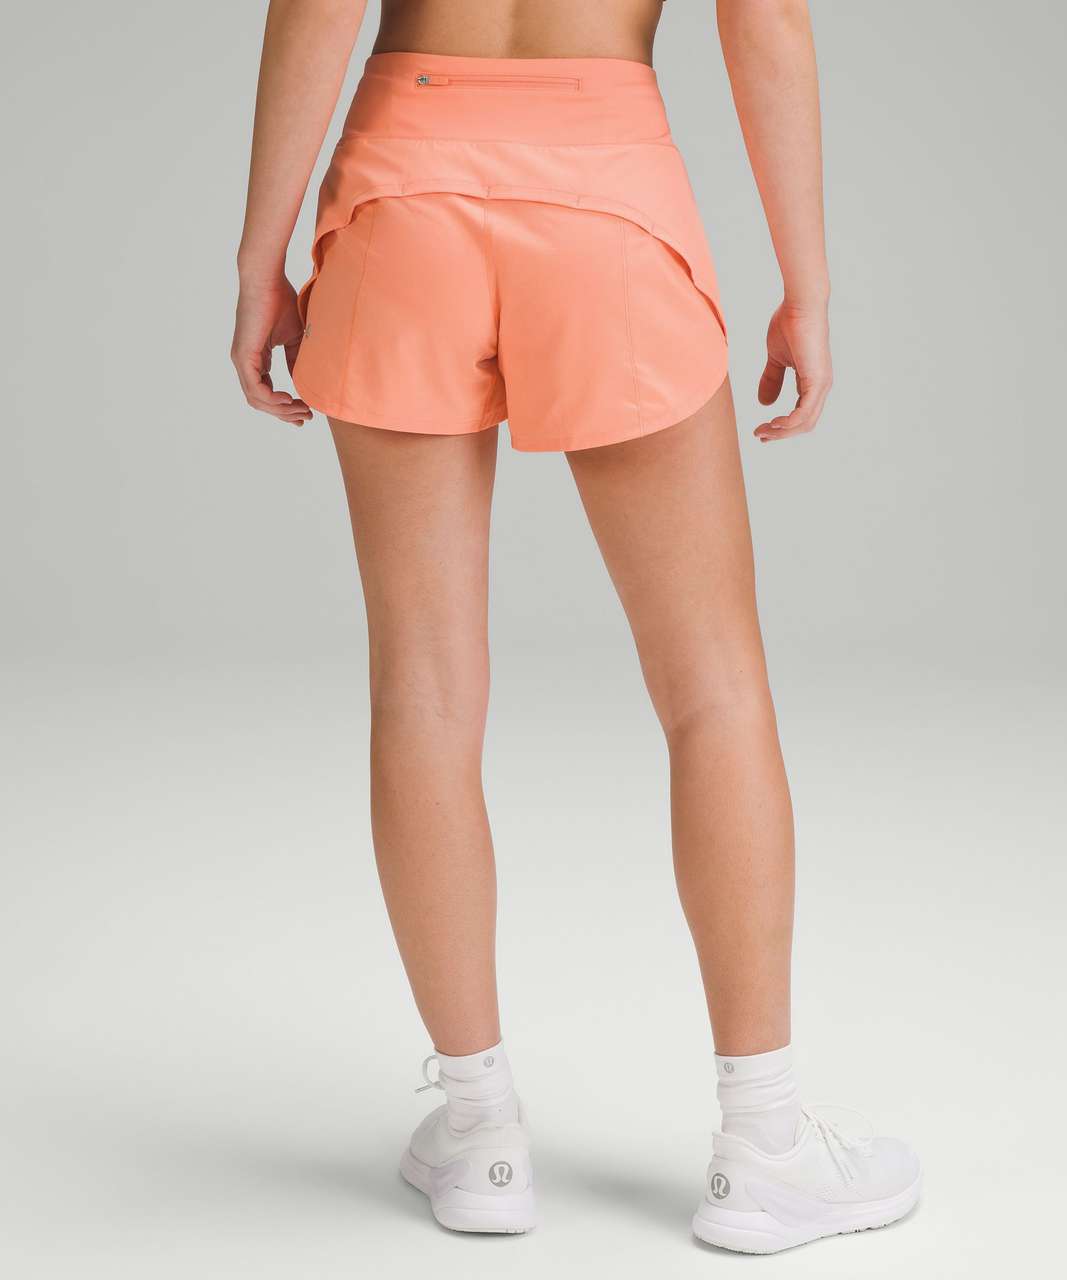 Lululemon Speed Up Mid-Rise Lined Short 4" - Sunny Coral